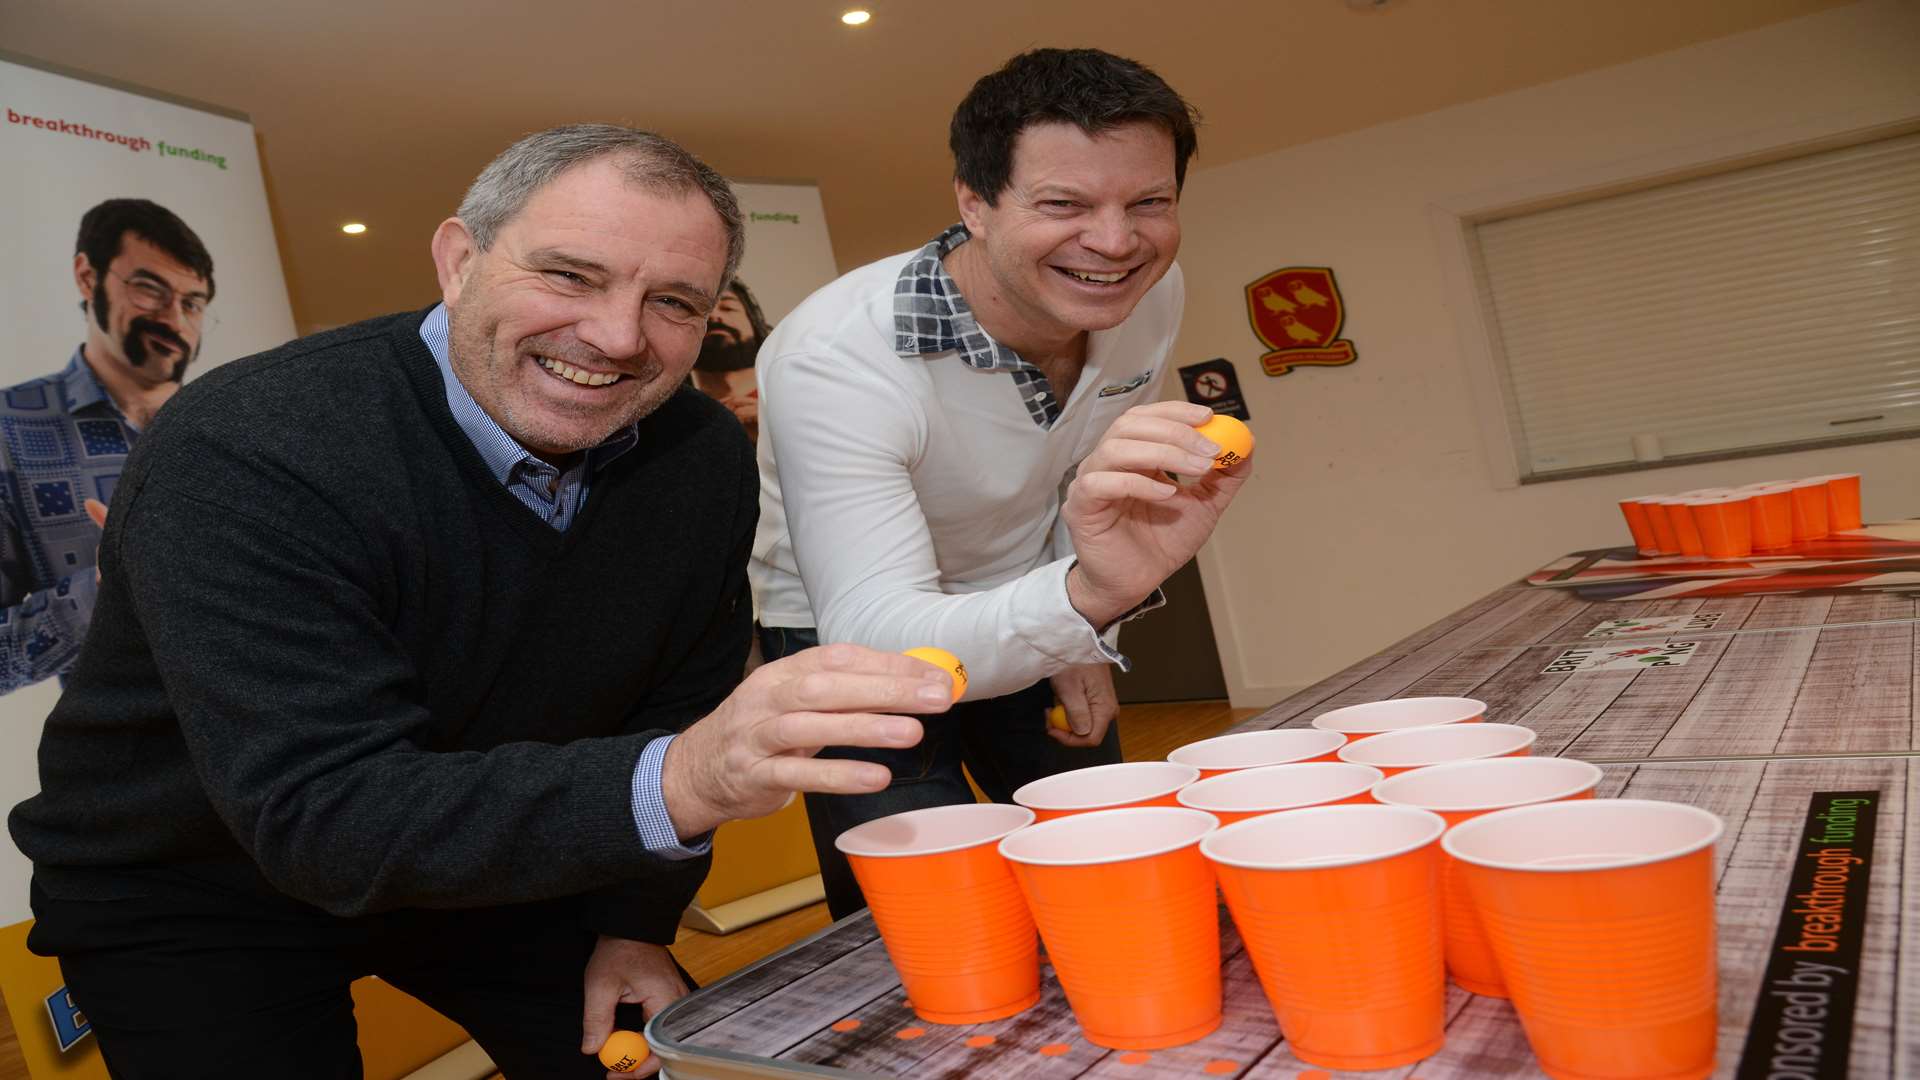 Dave Finch and Ian Hughes who have qualified to enter the first Official UK Beer Pong Championship